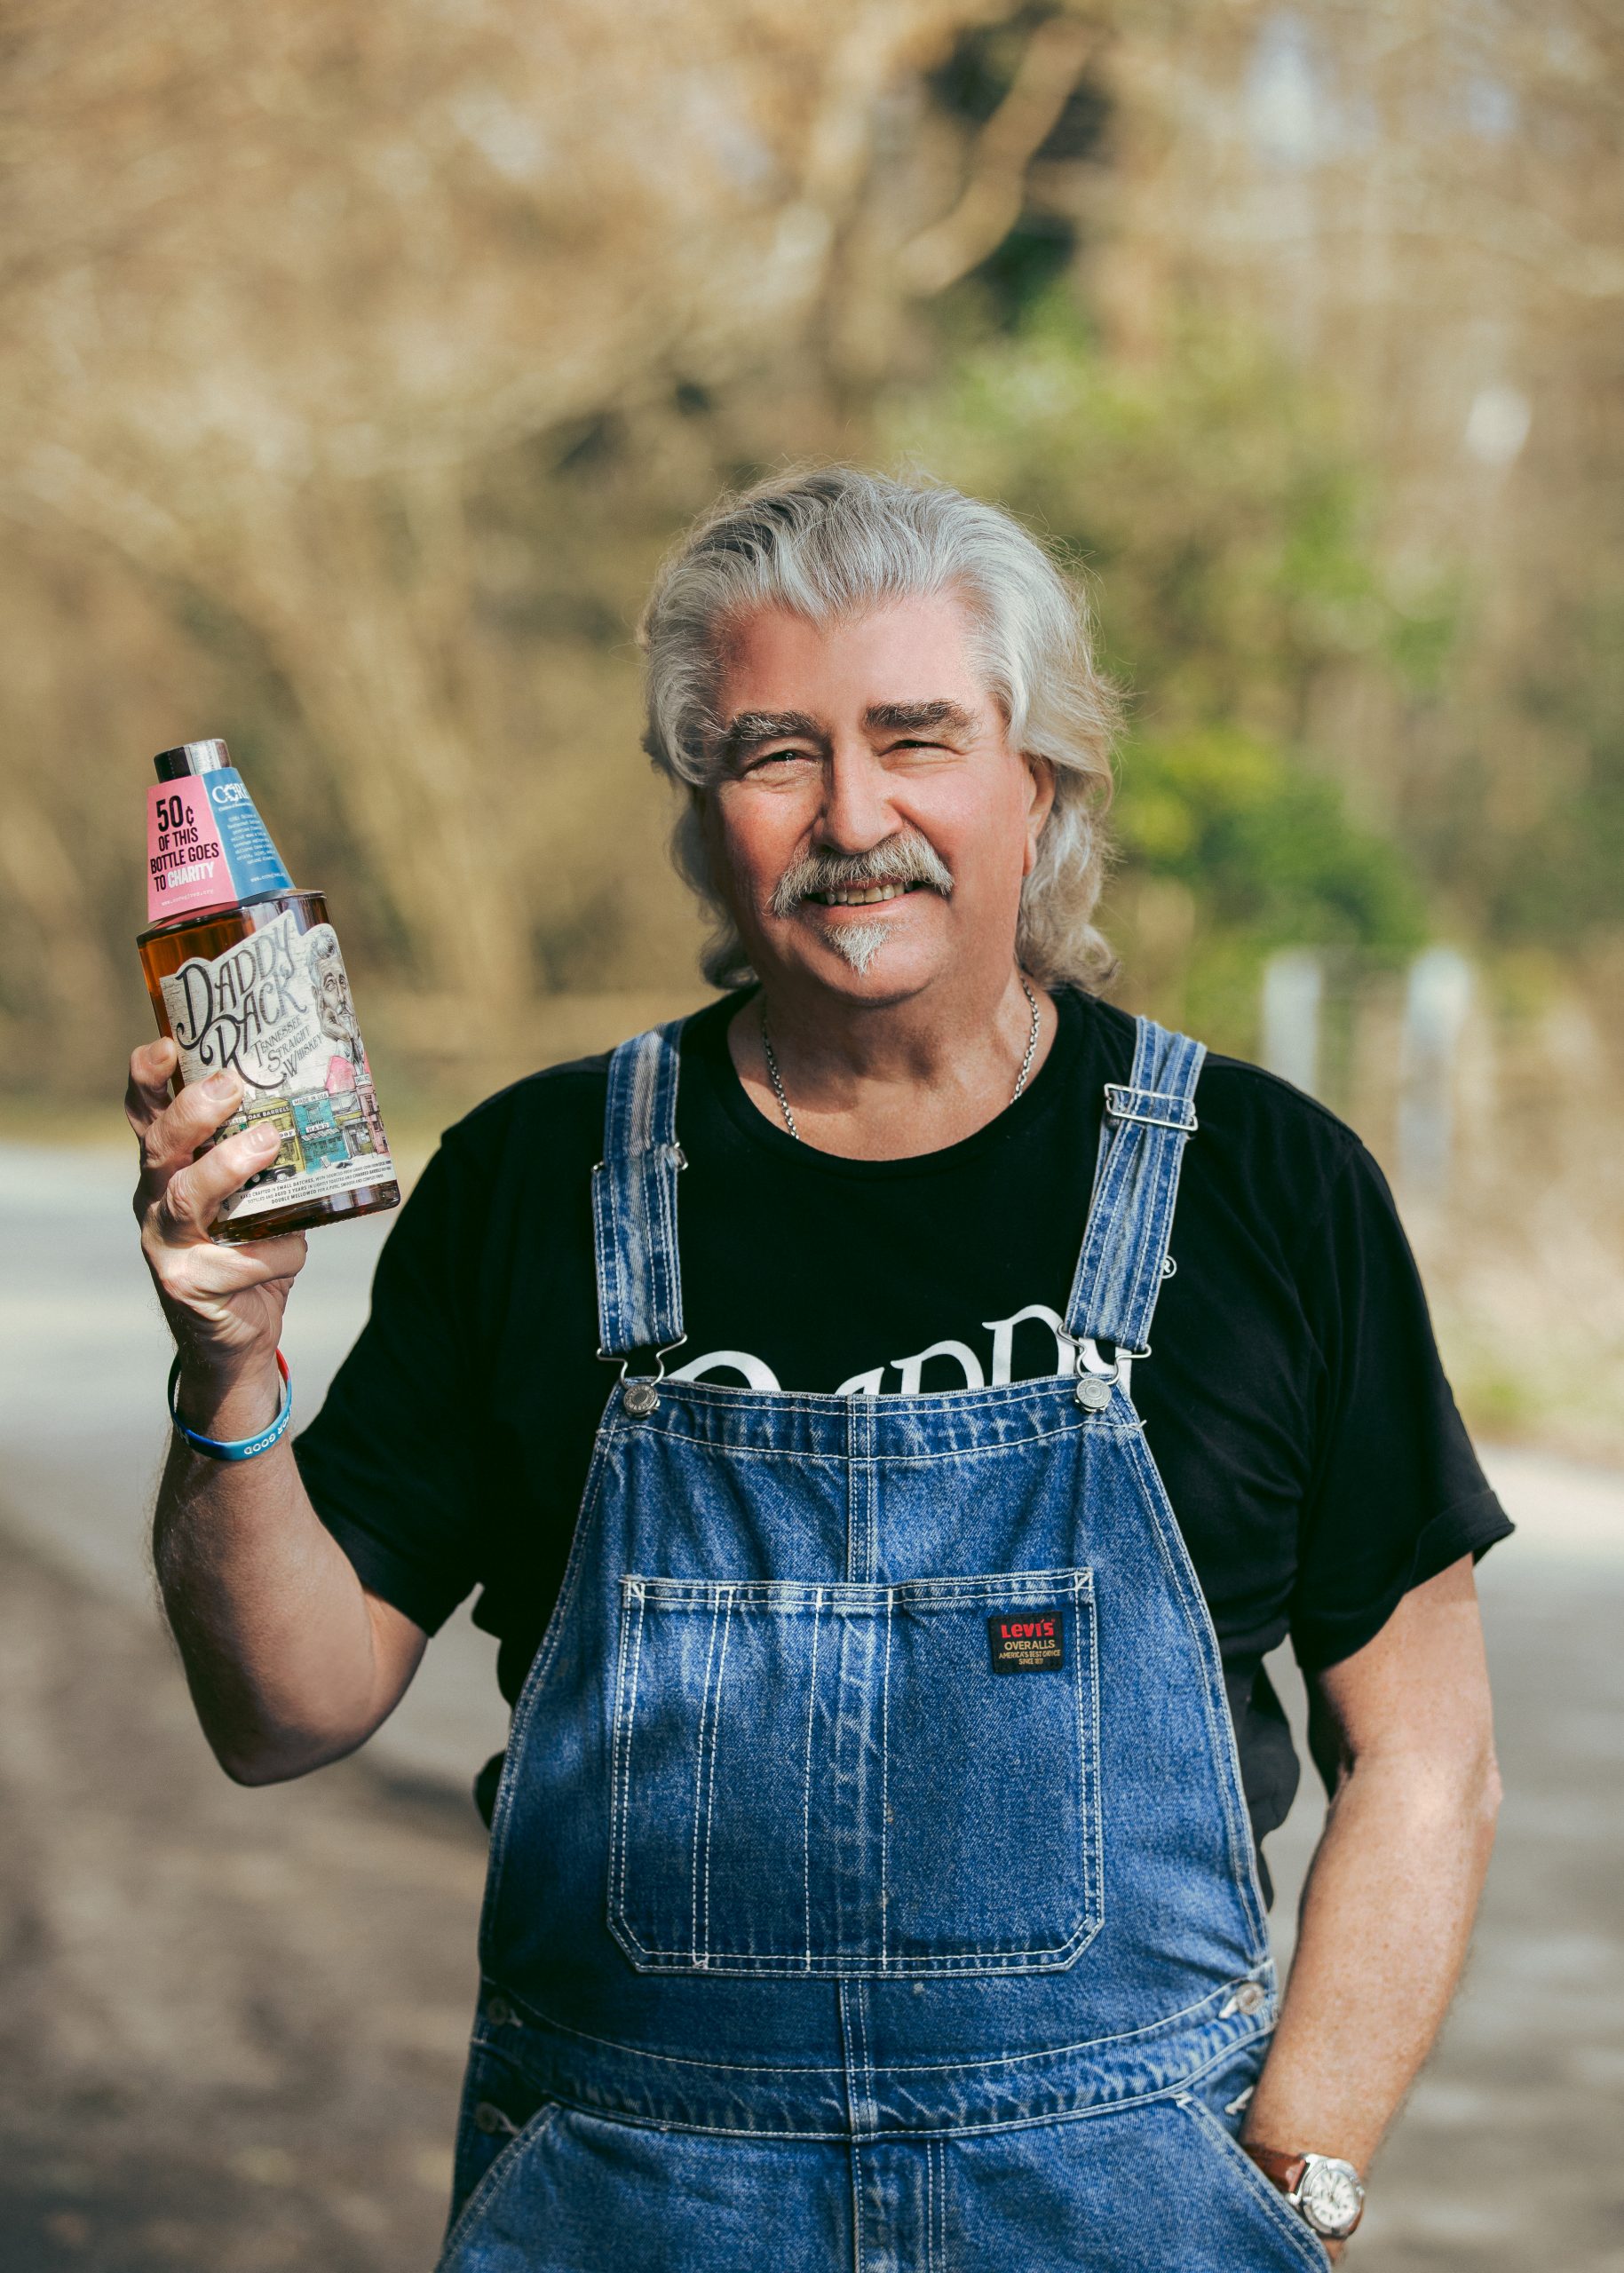 James 'Daddy Rack' Rackham holding bottle of spirit: Daddy Rack whiskey becomes the first of its kind to launch in Waitrose